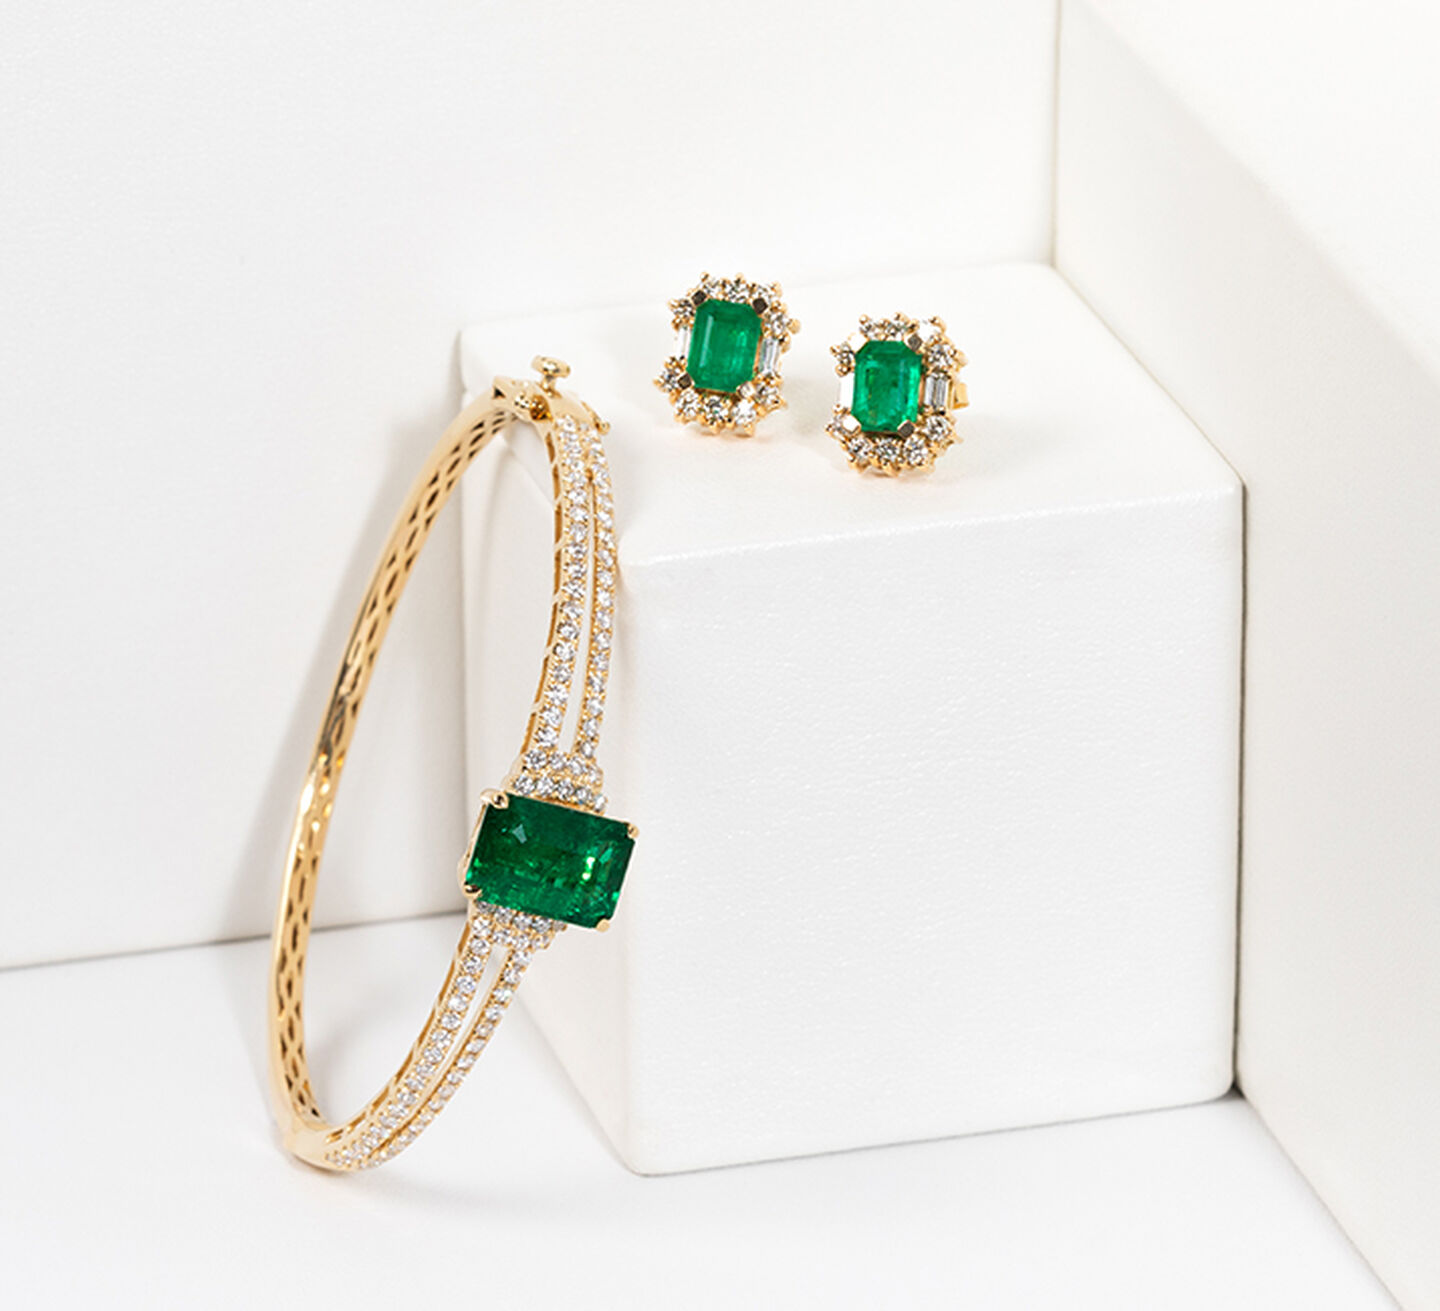 Gold and diamond bracelet with an emerald stone beside matching earrings